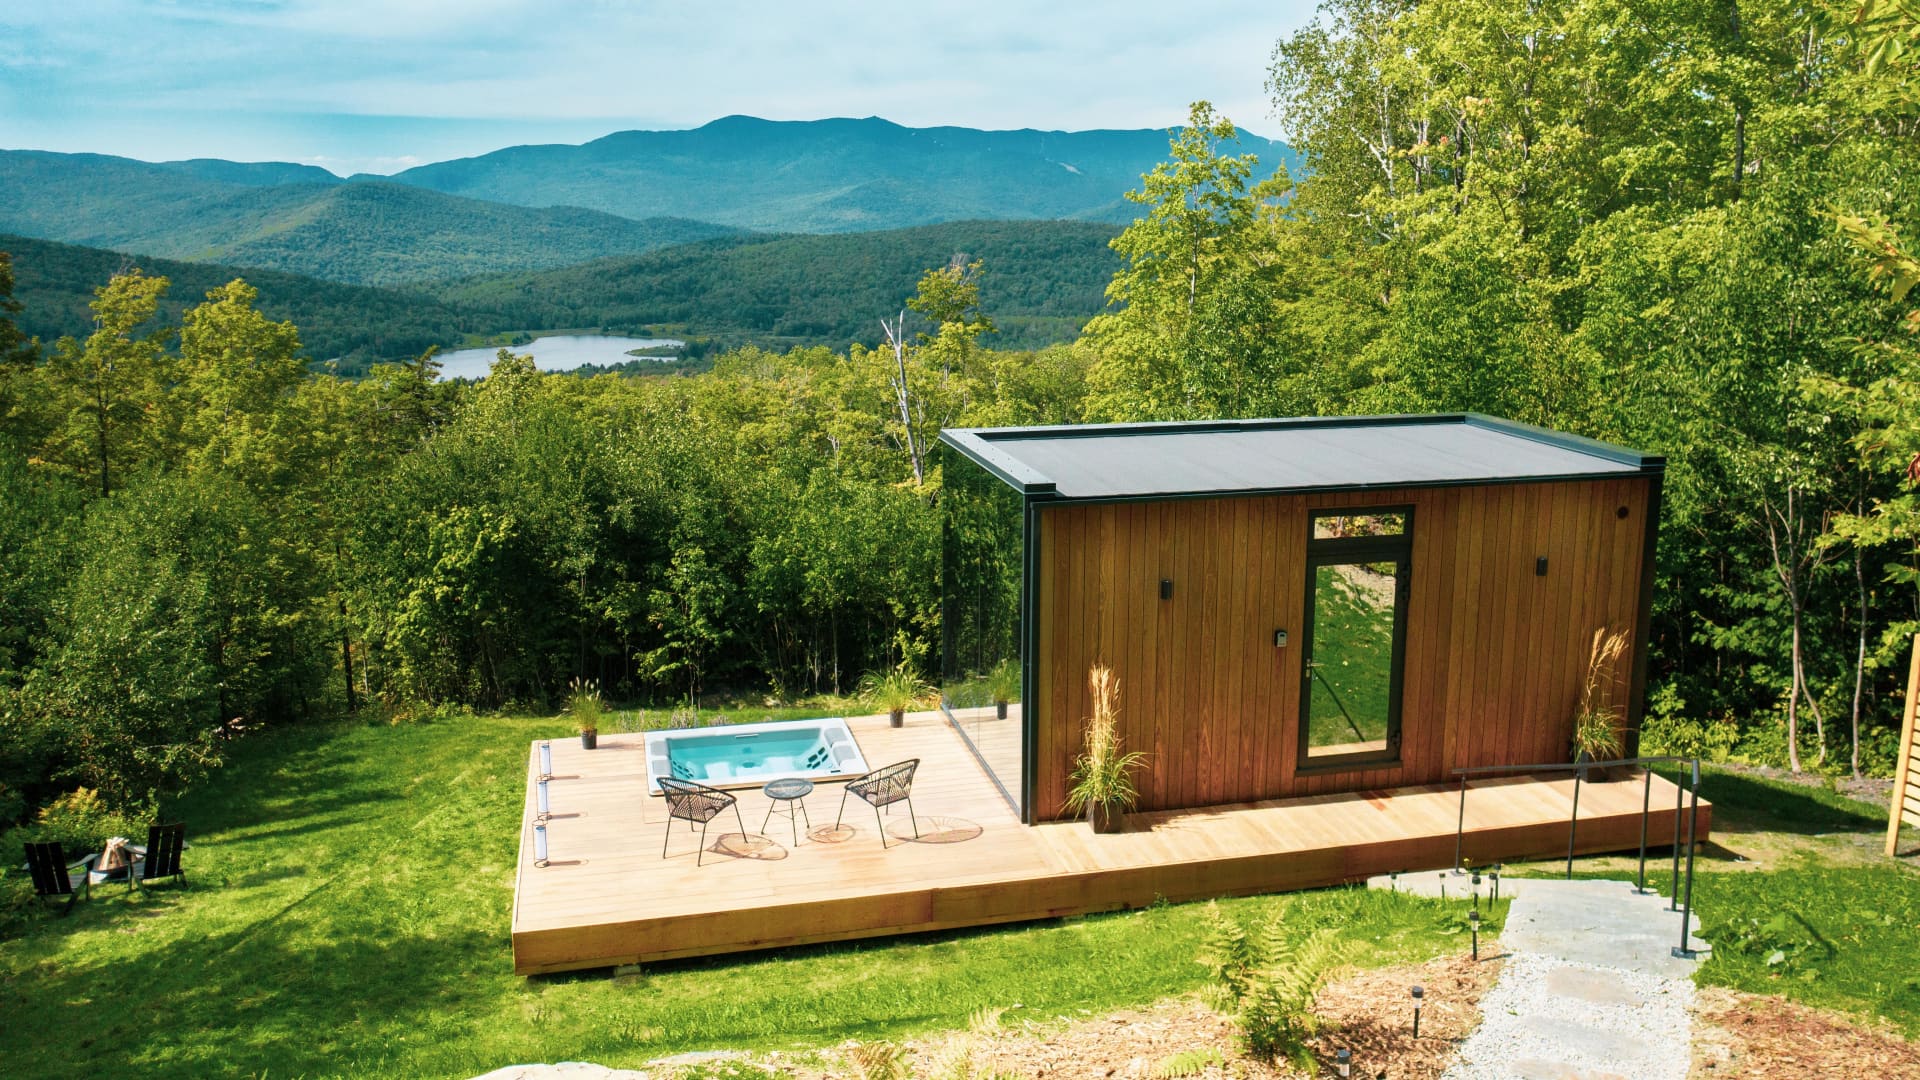 Located in the heart of the Green Mountains in Vermont, this tiny home is just 200 square feet. 